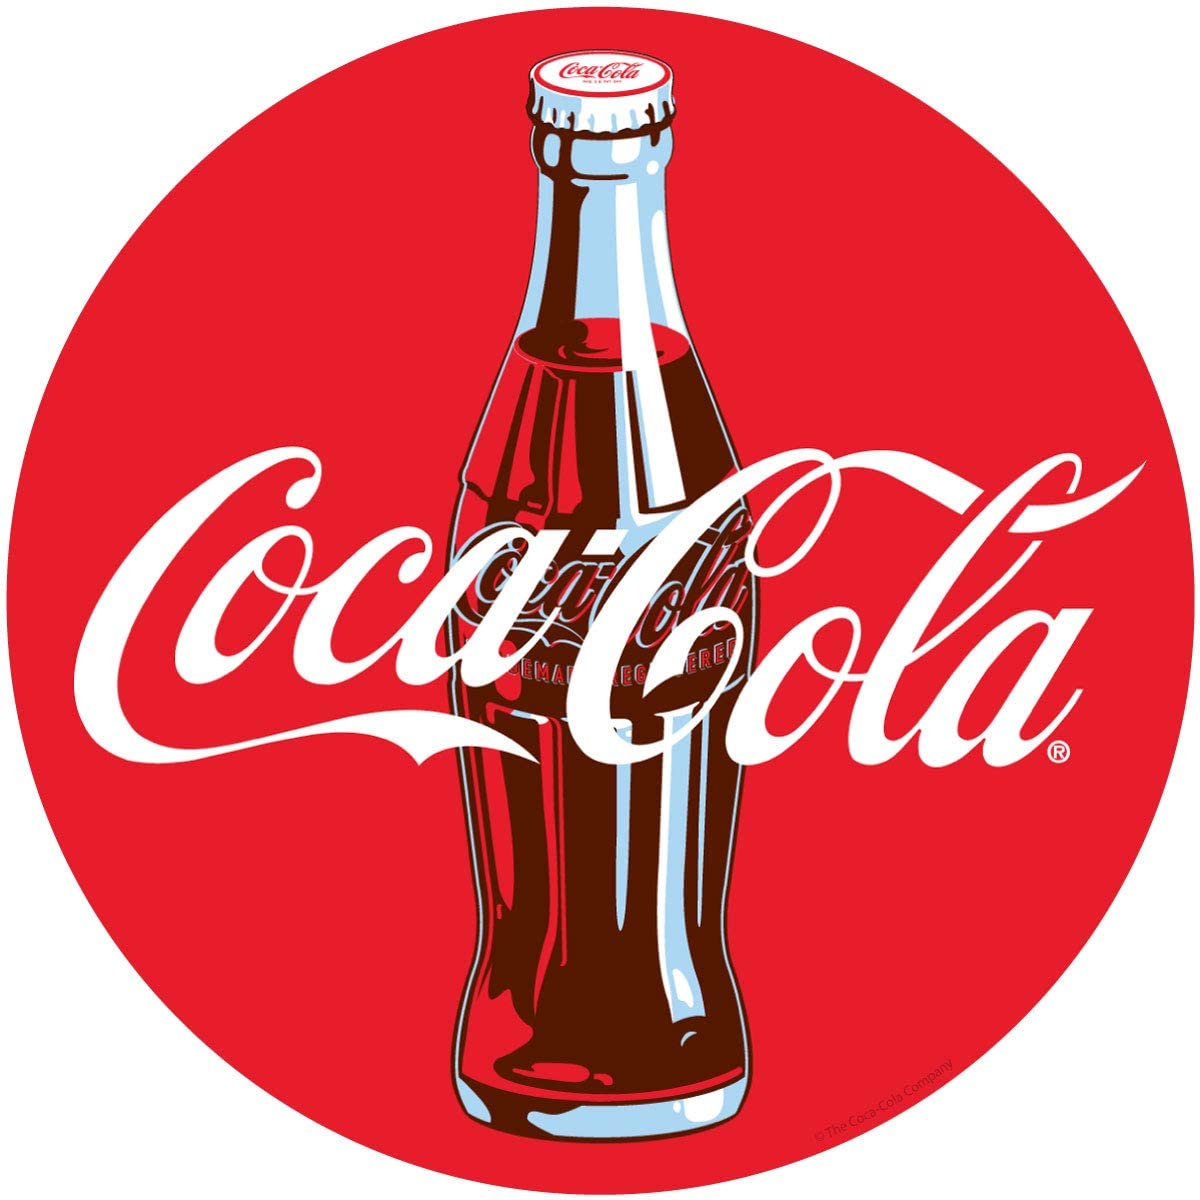 Coca Cola Red Circle Bottle Vinyl Sticker Vintage Style Decal: Arts, Crafts & Sewing